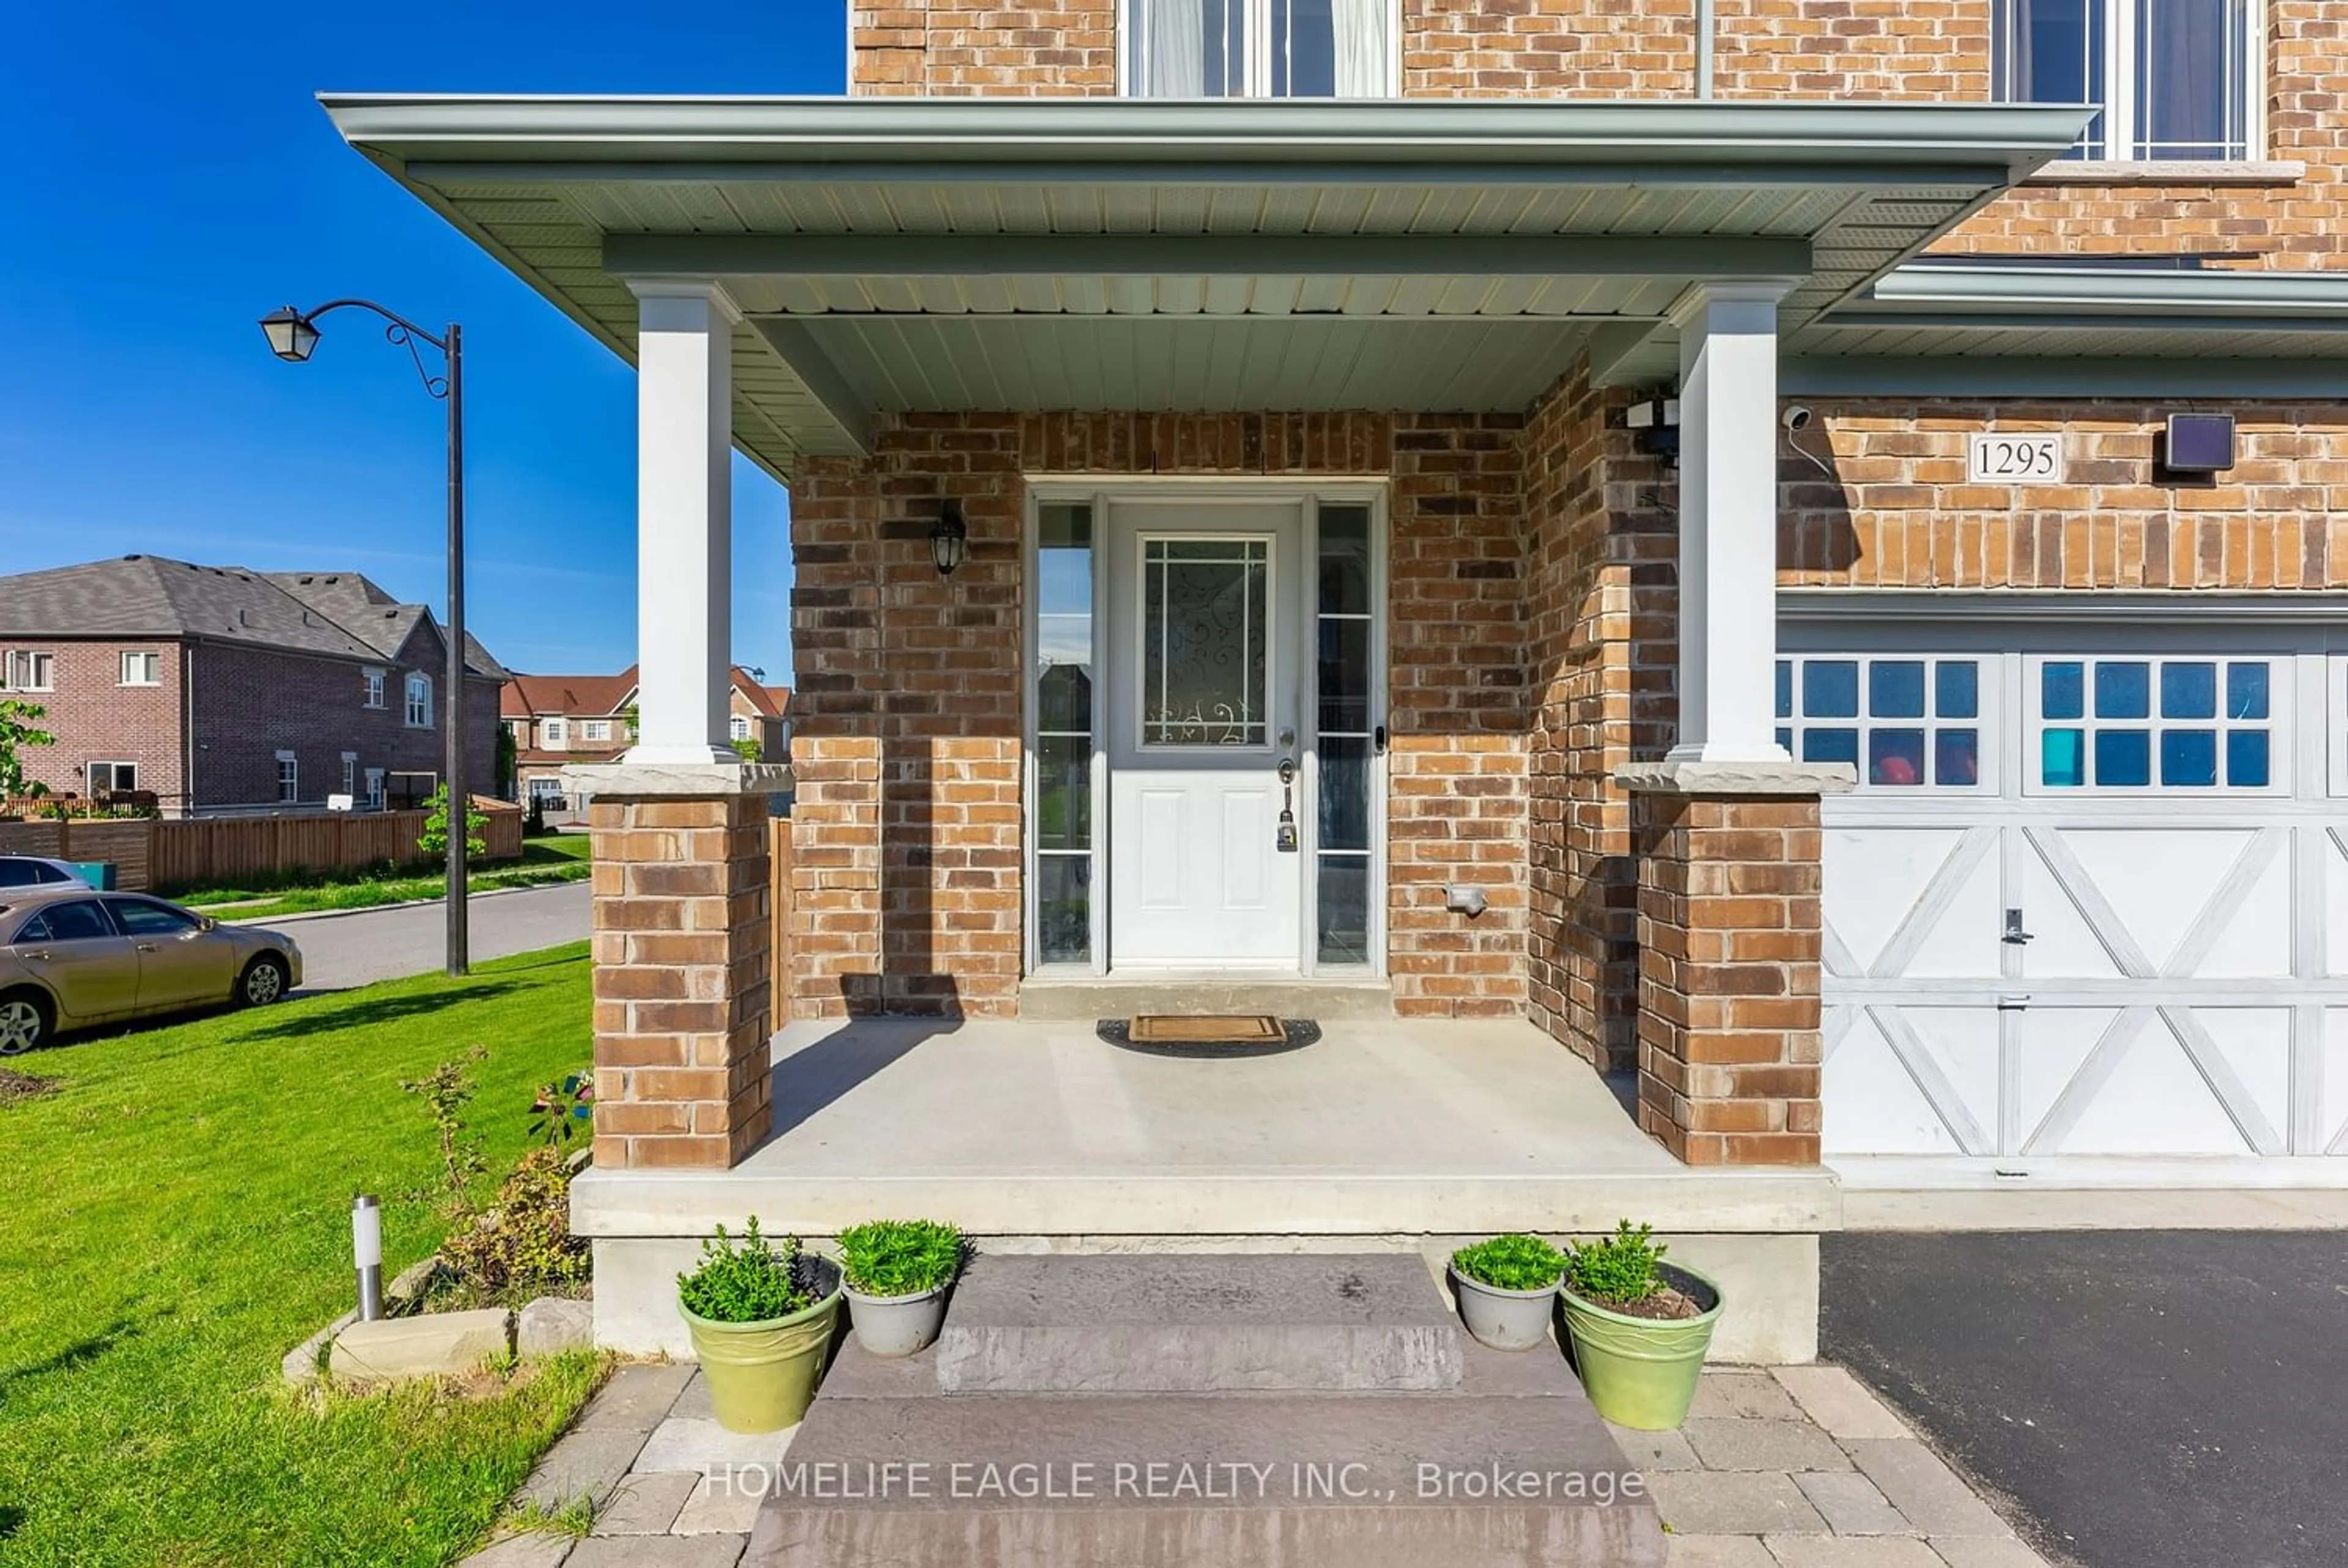 Home with brick exterior material for 1295 Dallman St, Innisfil Ontario L0L 1W0